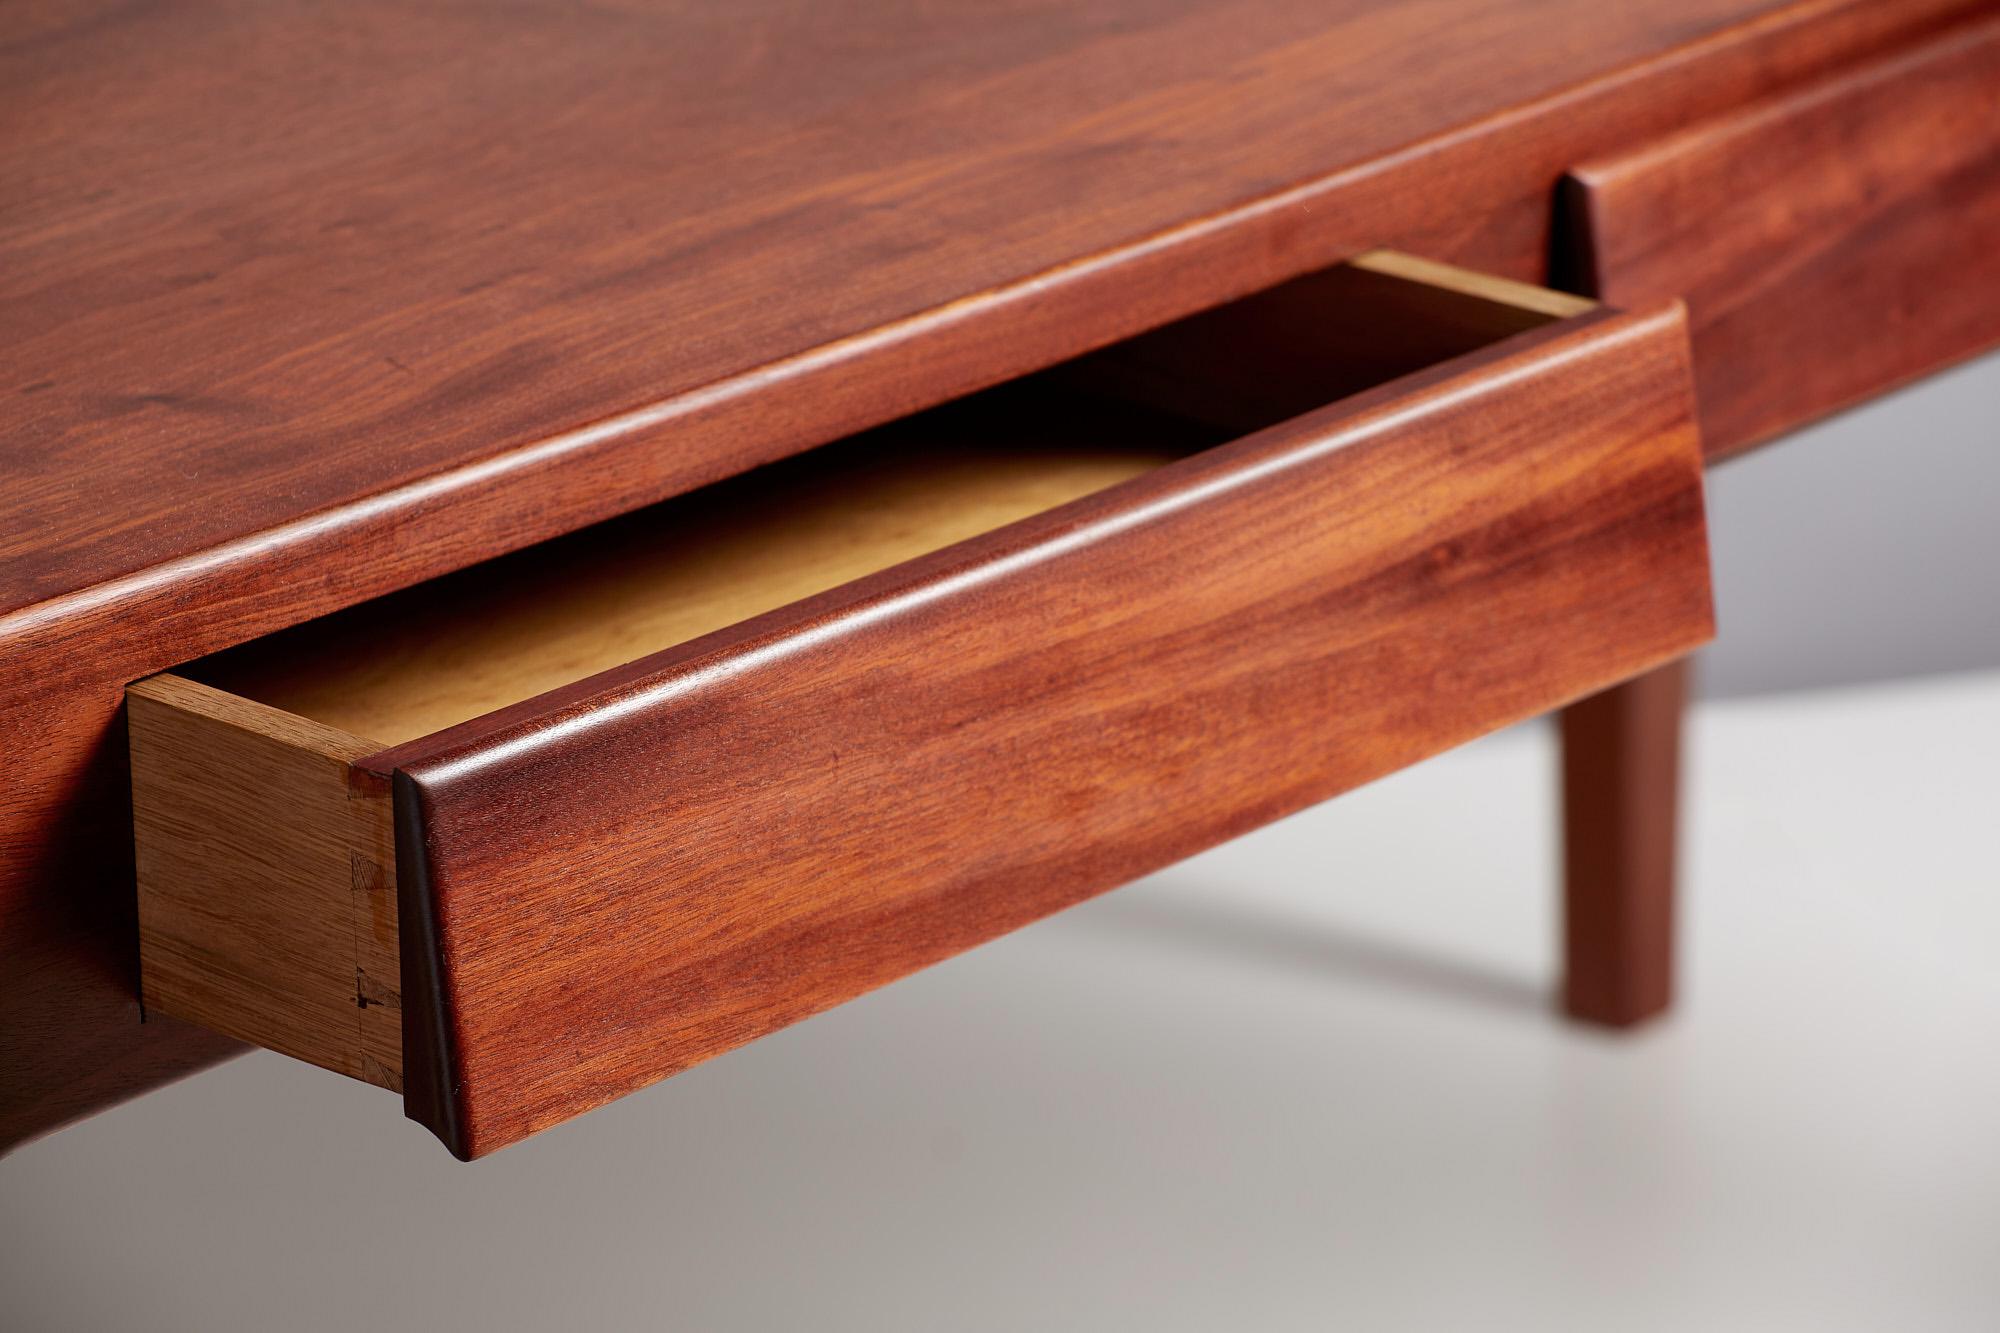 Danish Cabinetmaker 1940s Mahogany Desk In Excellent Condition For Sale In London, GB